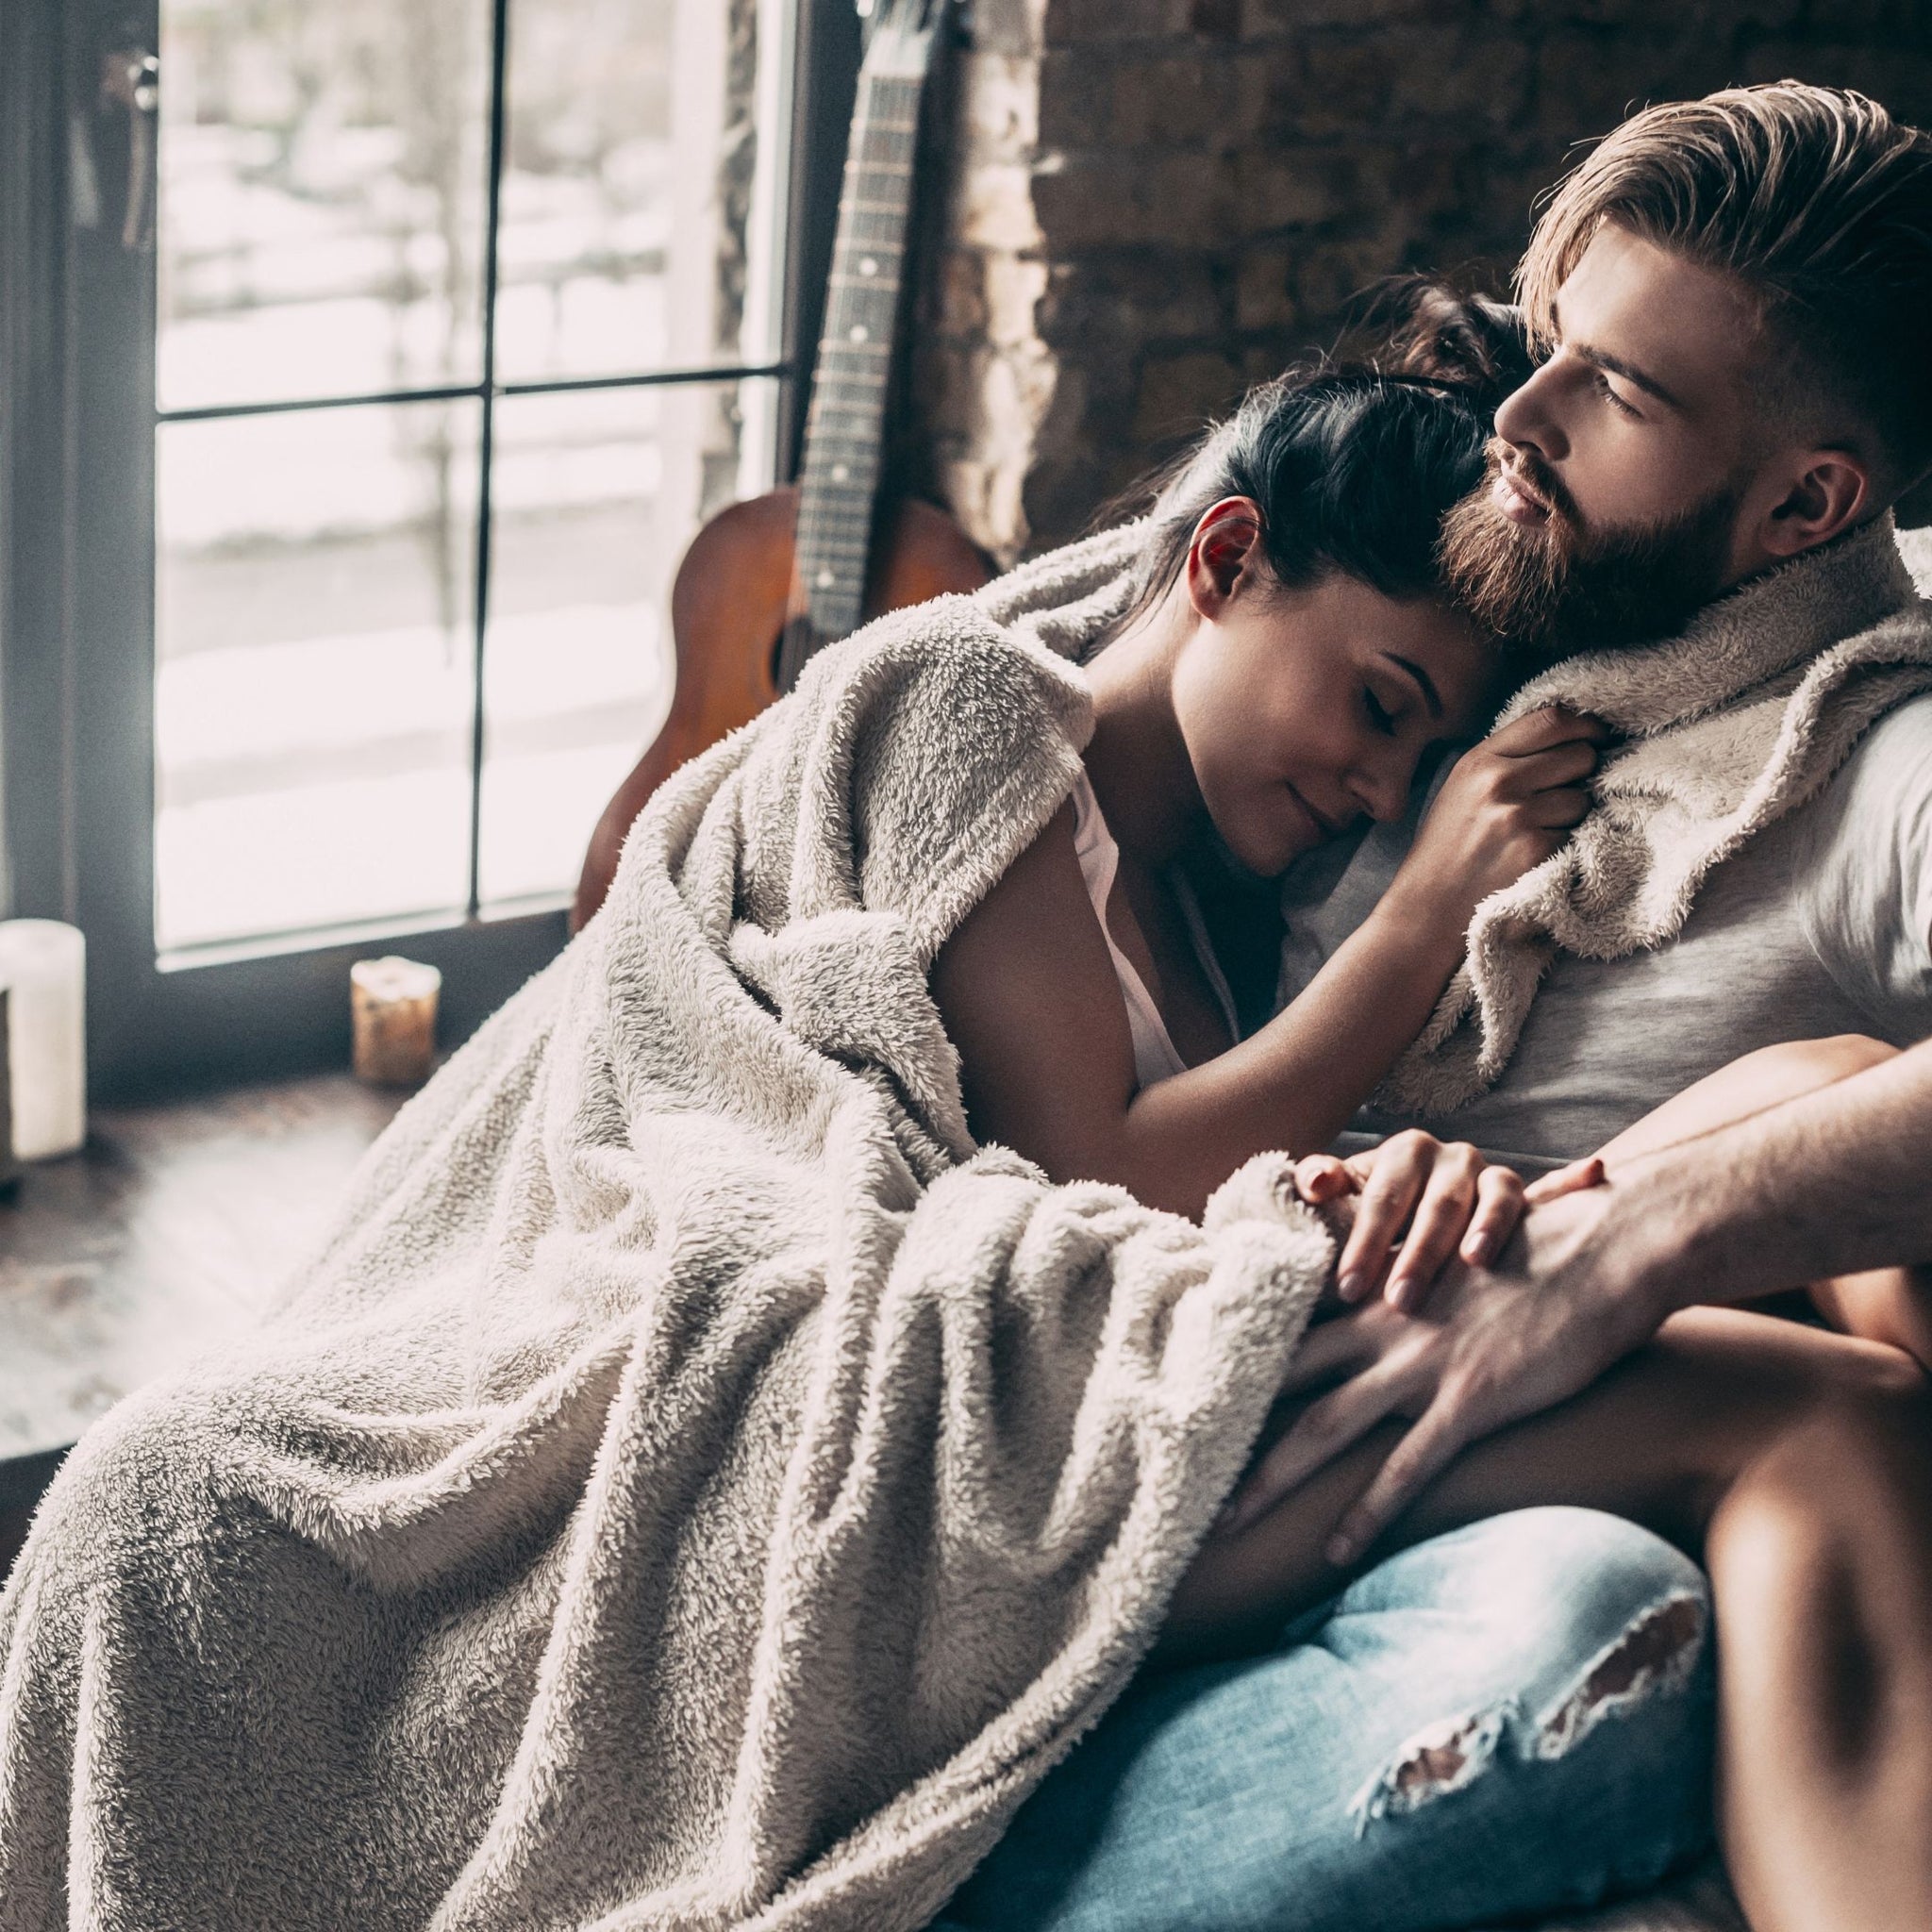 6 Amazing Ways to Relax At Home As a Couple